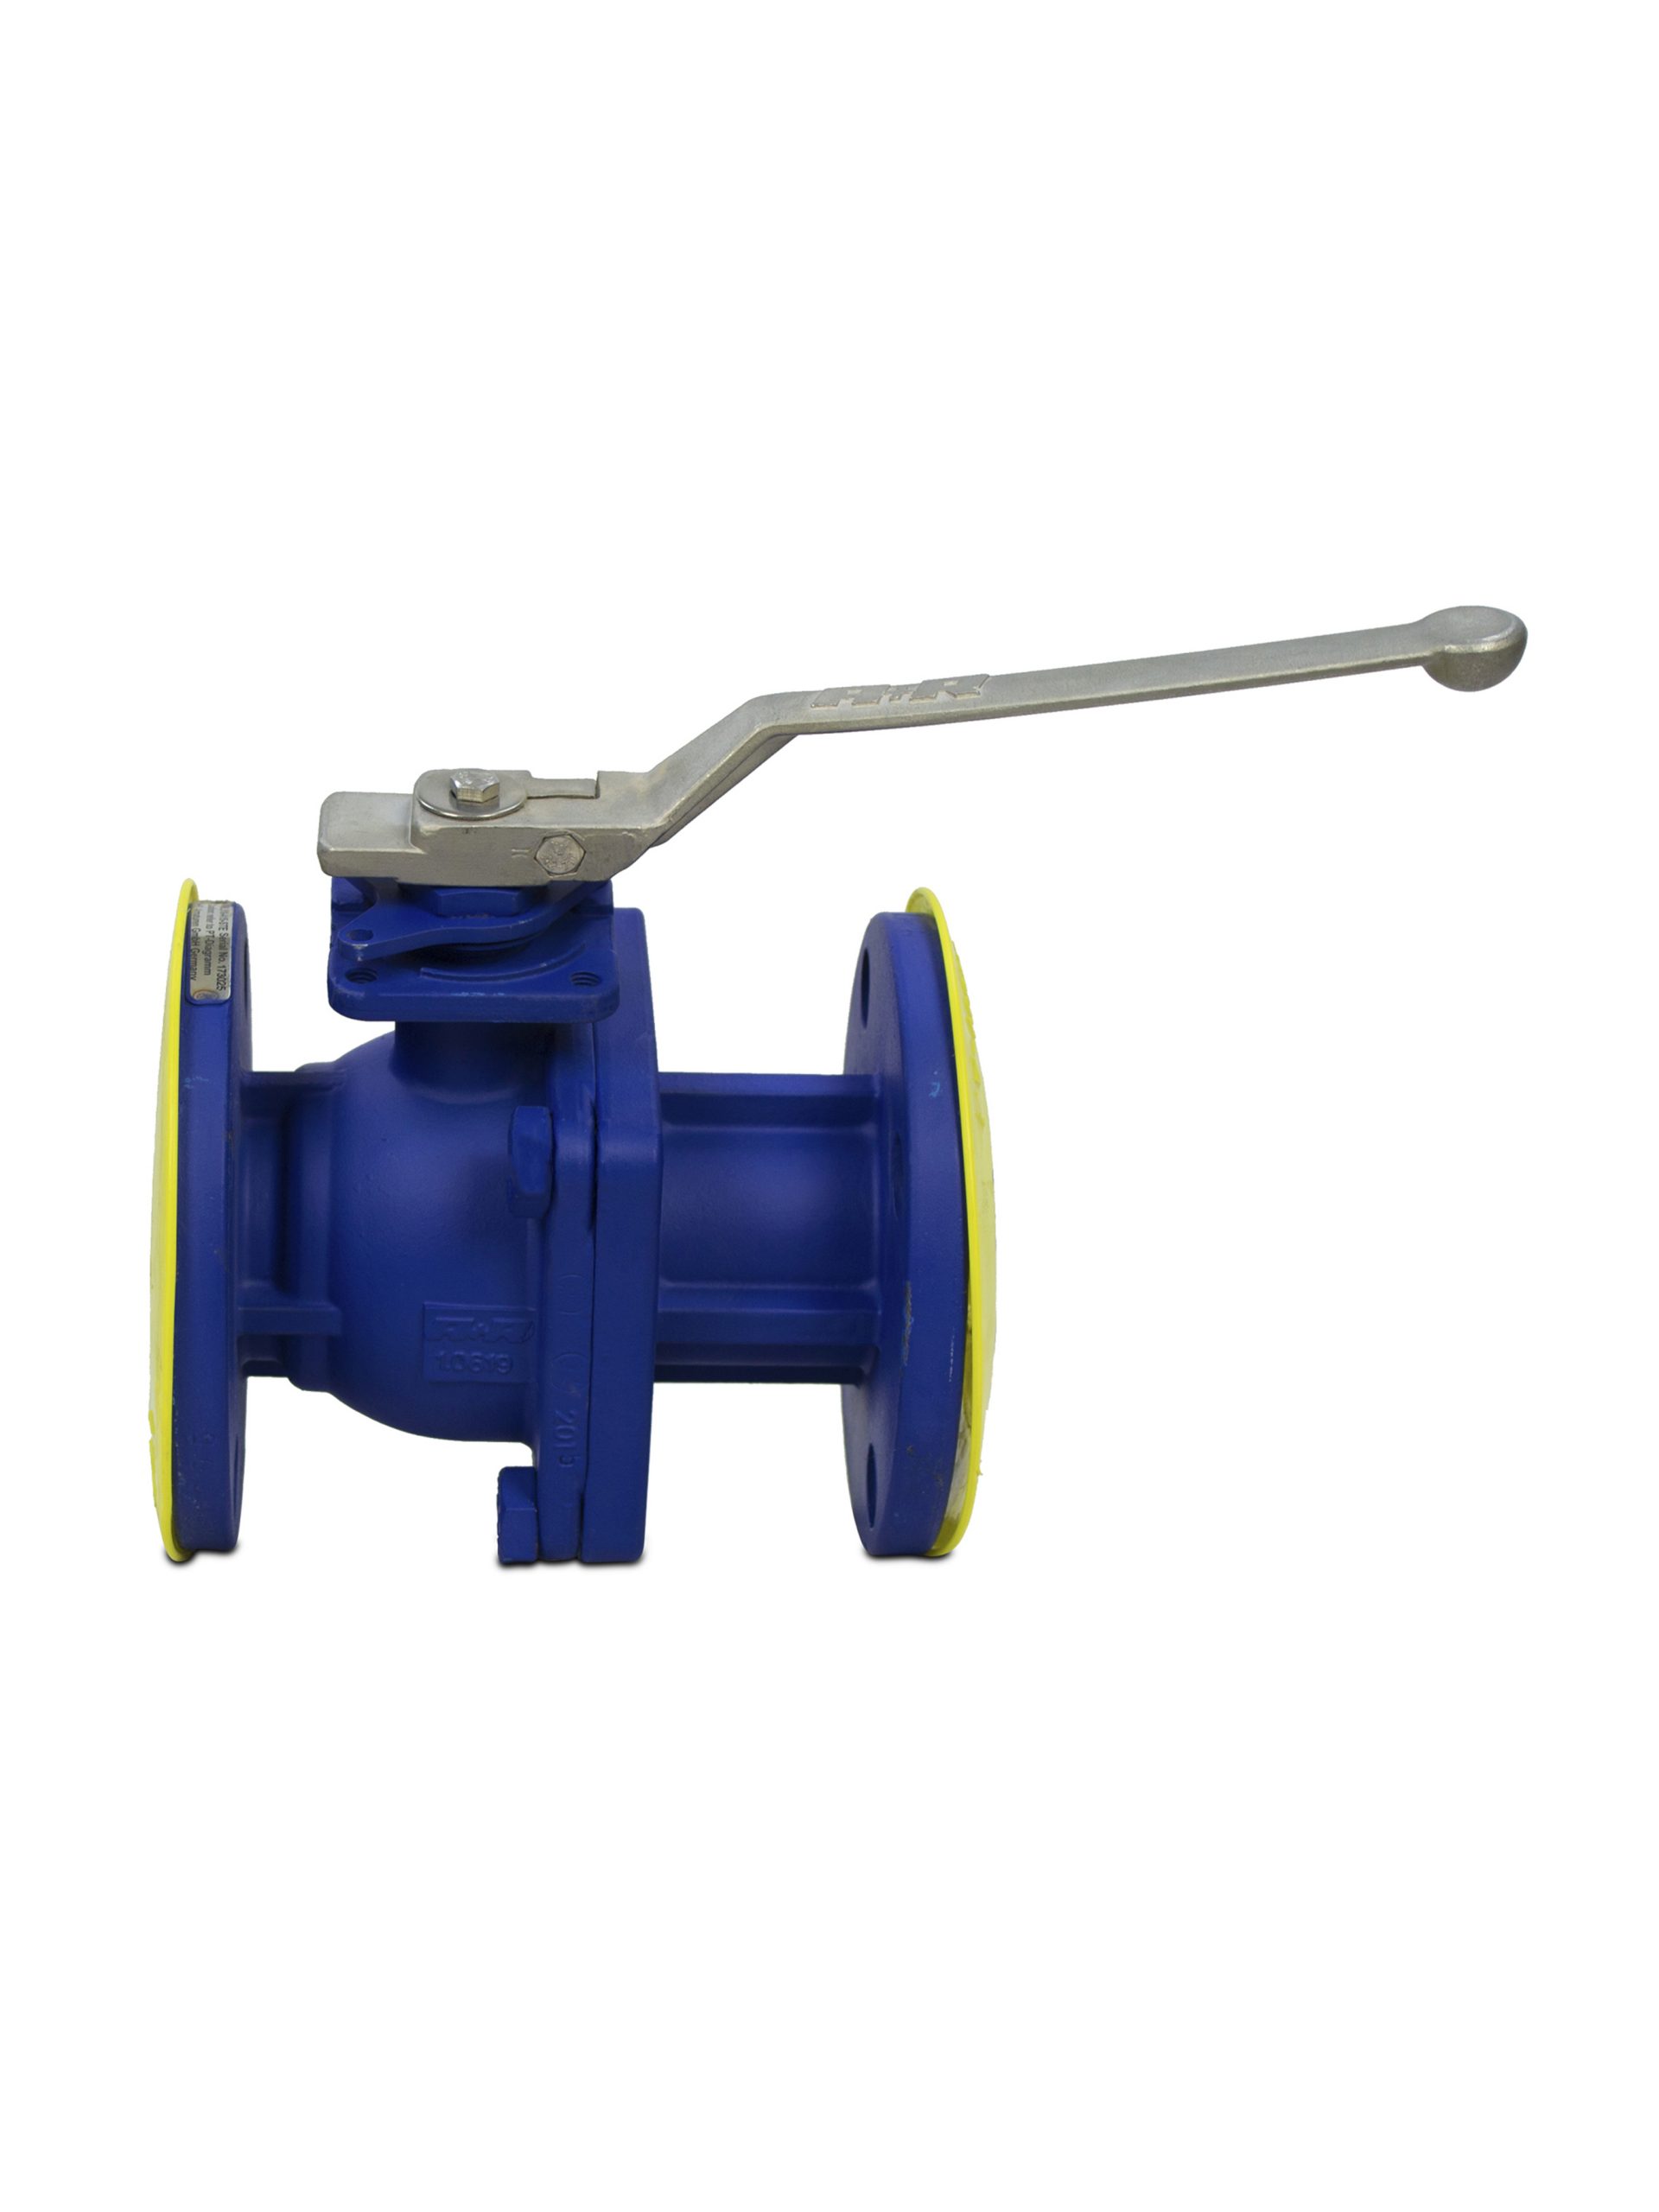 FLANGED BALL VALVE 6 INCHES ANSI 150 in UAE